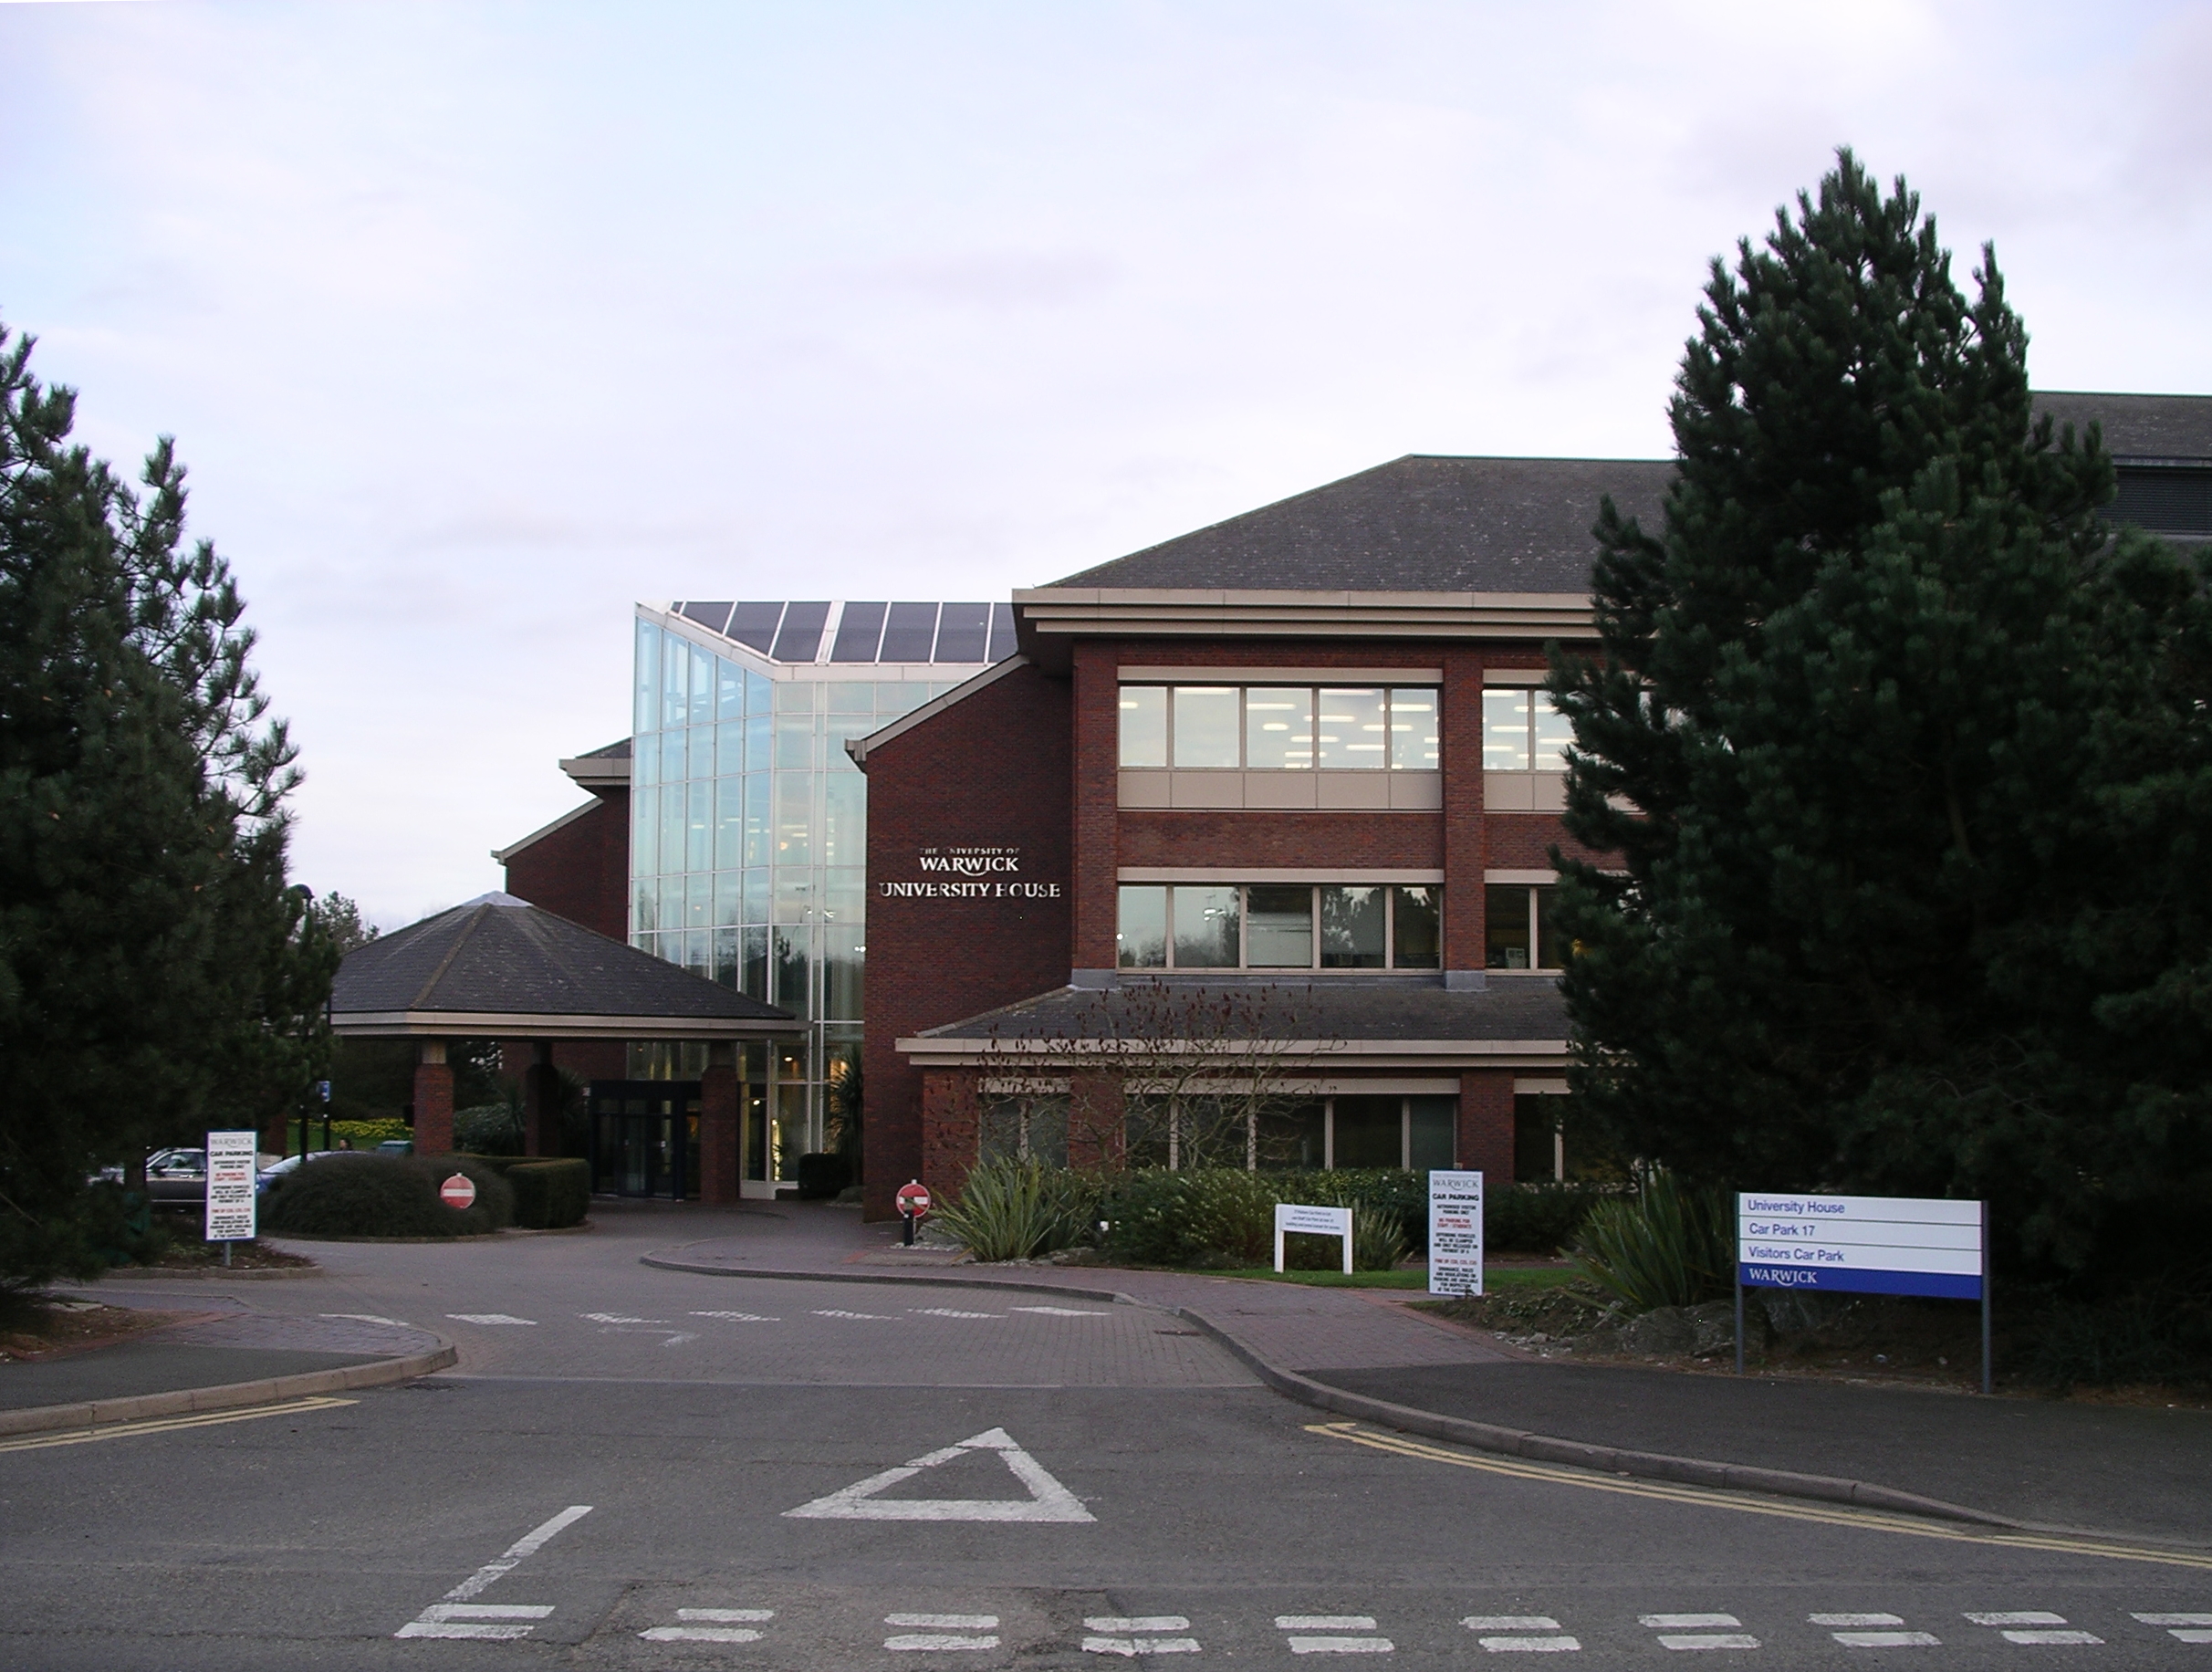 University House at University of Warwick. It is probably not the specific building where Katy Montgomerie's speech was due to be held.